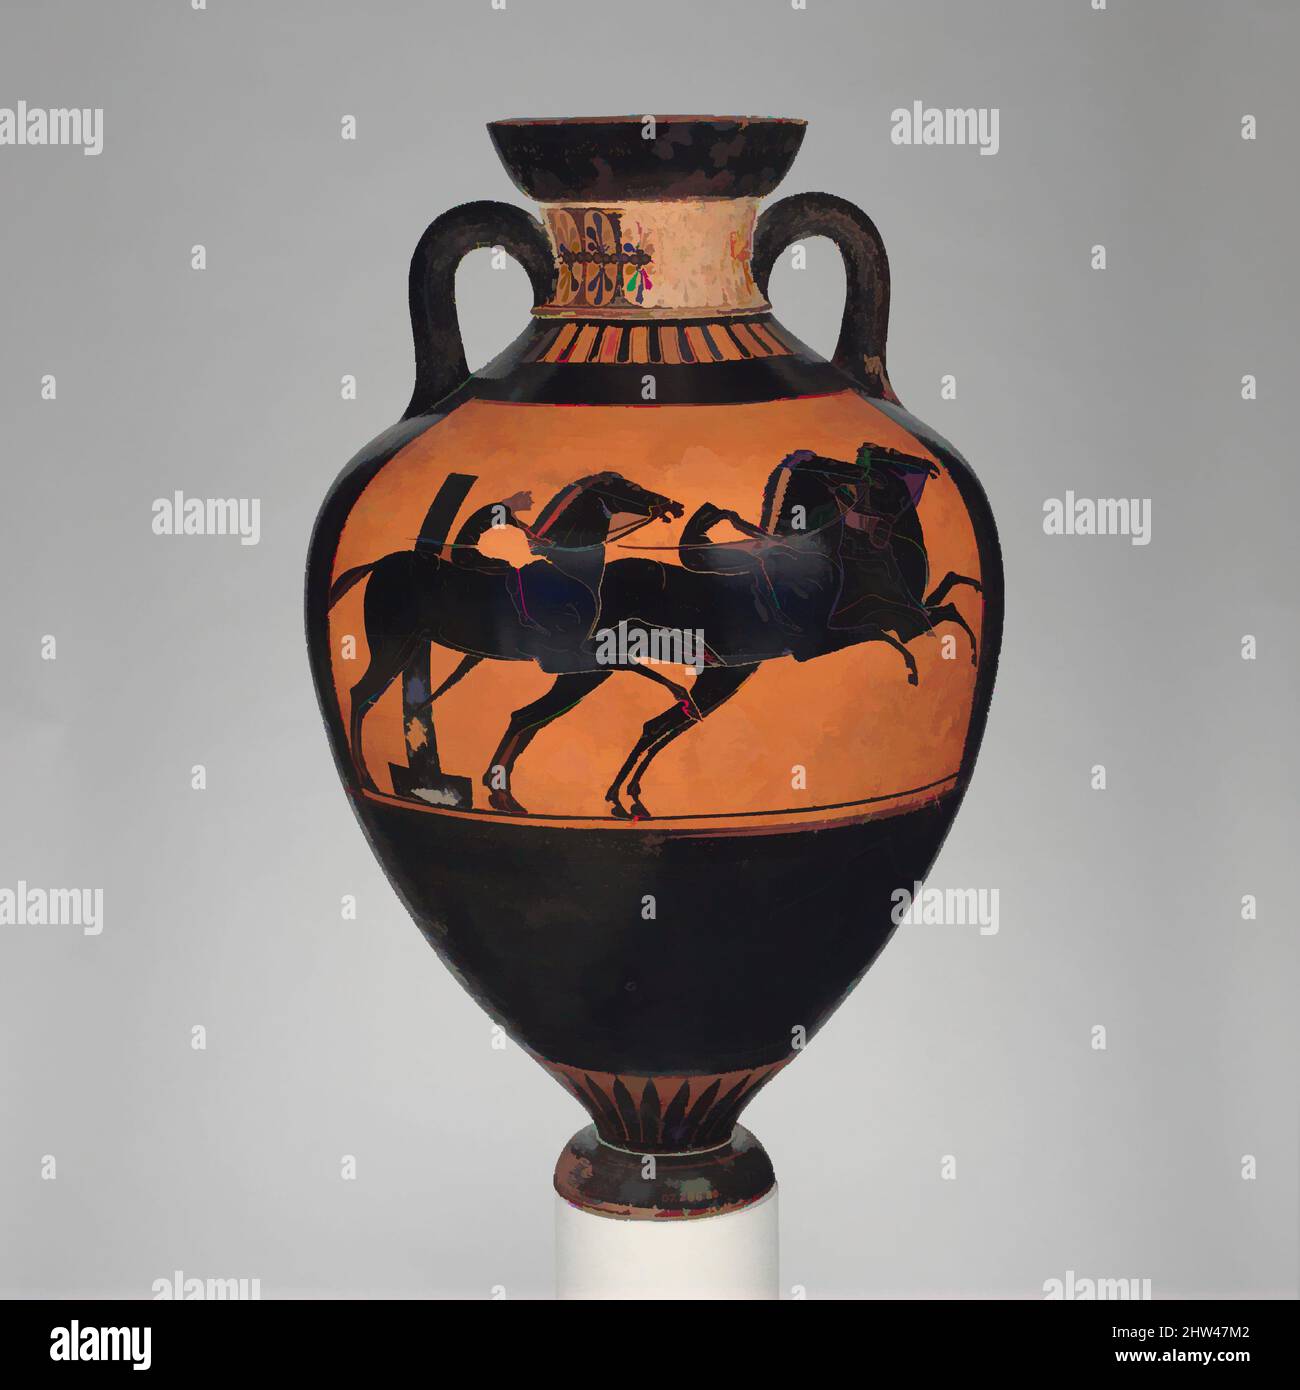 Art inspired by Terracotta Panathenaic prize amphora (jar), Archaic, ca. 510 B.C., Greek, Attic, Terracotta; black-figure, H. 25 in. (63.5 cm), Vases, Obverse, Athena, Reverse, horse race. This representation of a horse race includes the post marking the turn in the course, Classic works modernized by Artotop with a splash of modernity. Shapes, color and value, eye-catching visual impact on art. Emotions through freedom of artworks in a contemporary way. A timeless message pursuing a wildly creative new direction. Artists turning to the digital medium and creating the Artotop NFT Stock Photo